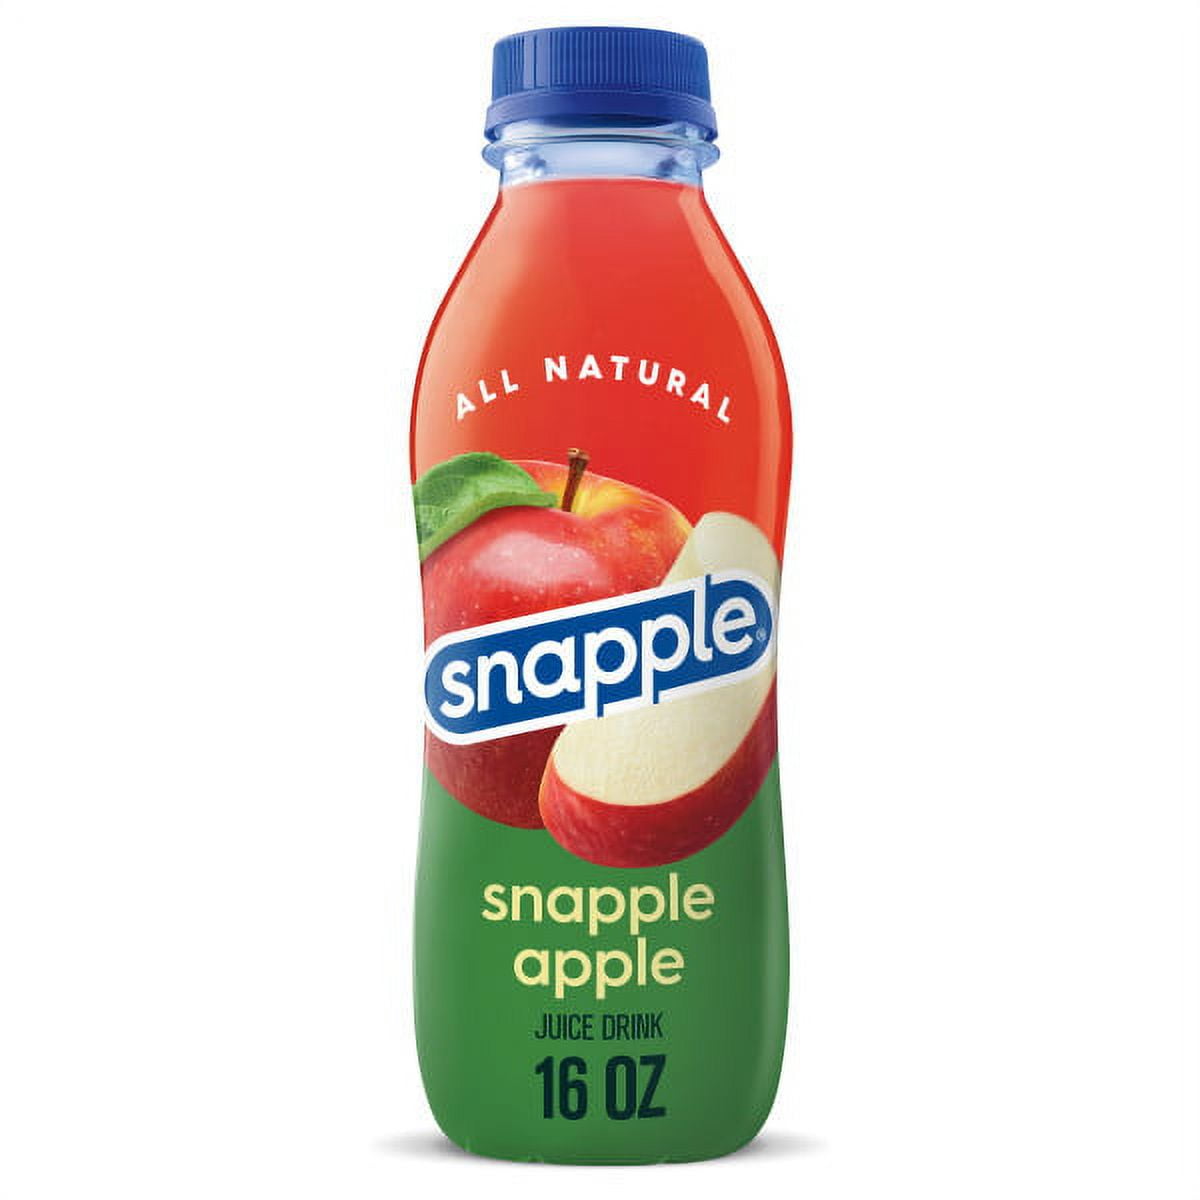 Image for SNAPPLE APPLE.